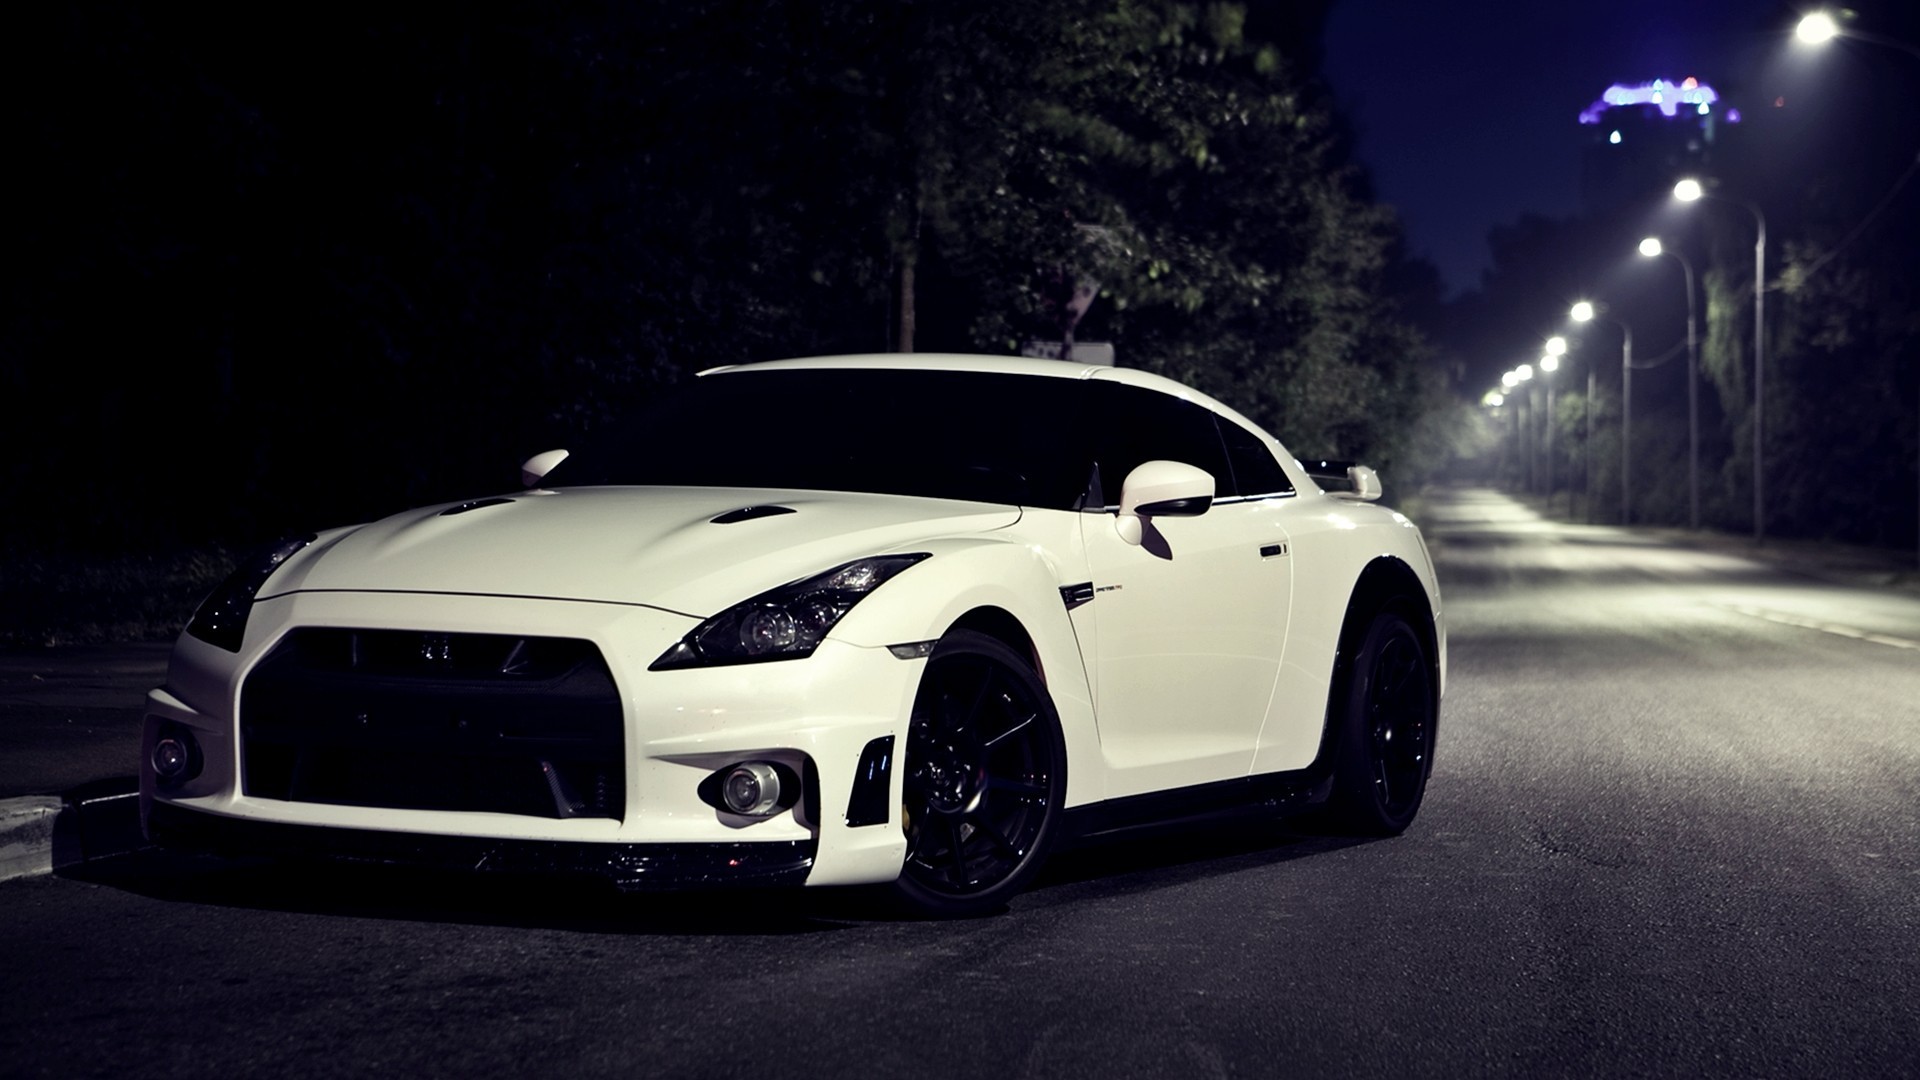 General 1920x1080 car Nissan Nissan GT-R frontal view night street light white cars vehicle Japanese cars